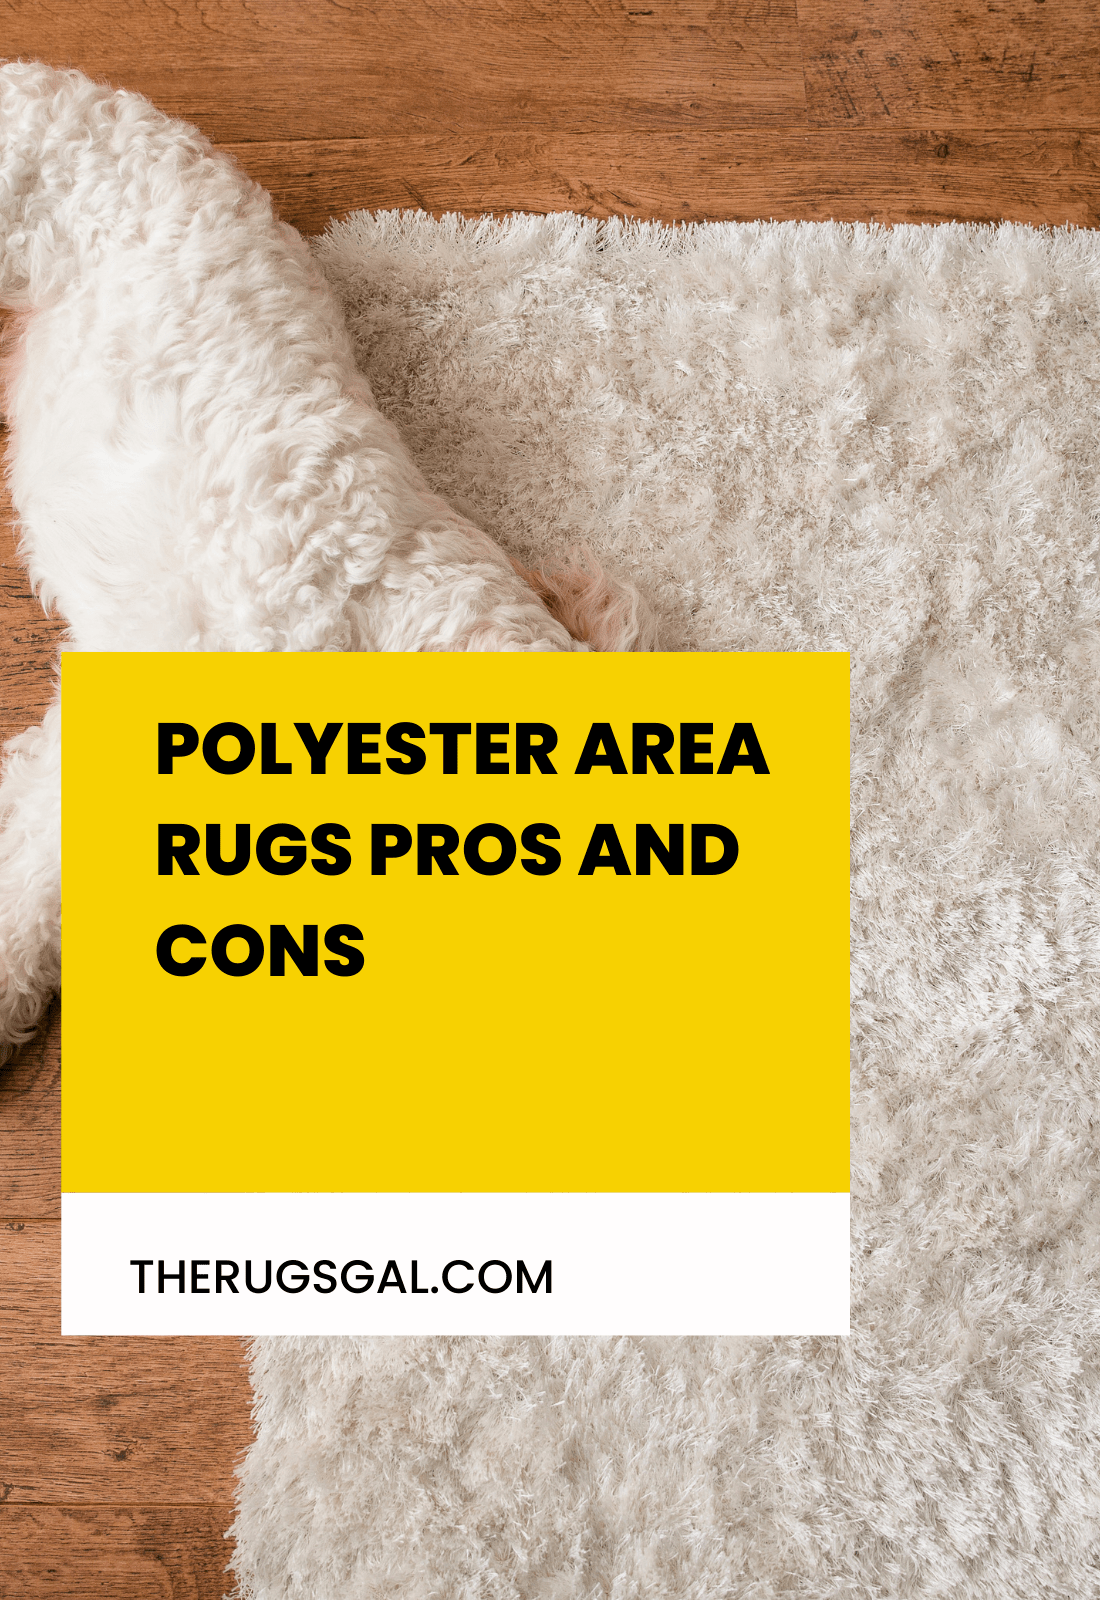 Polyester Area Rugs Pros and Cons